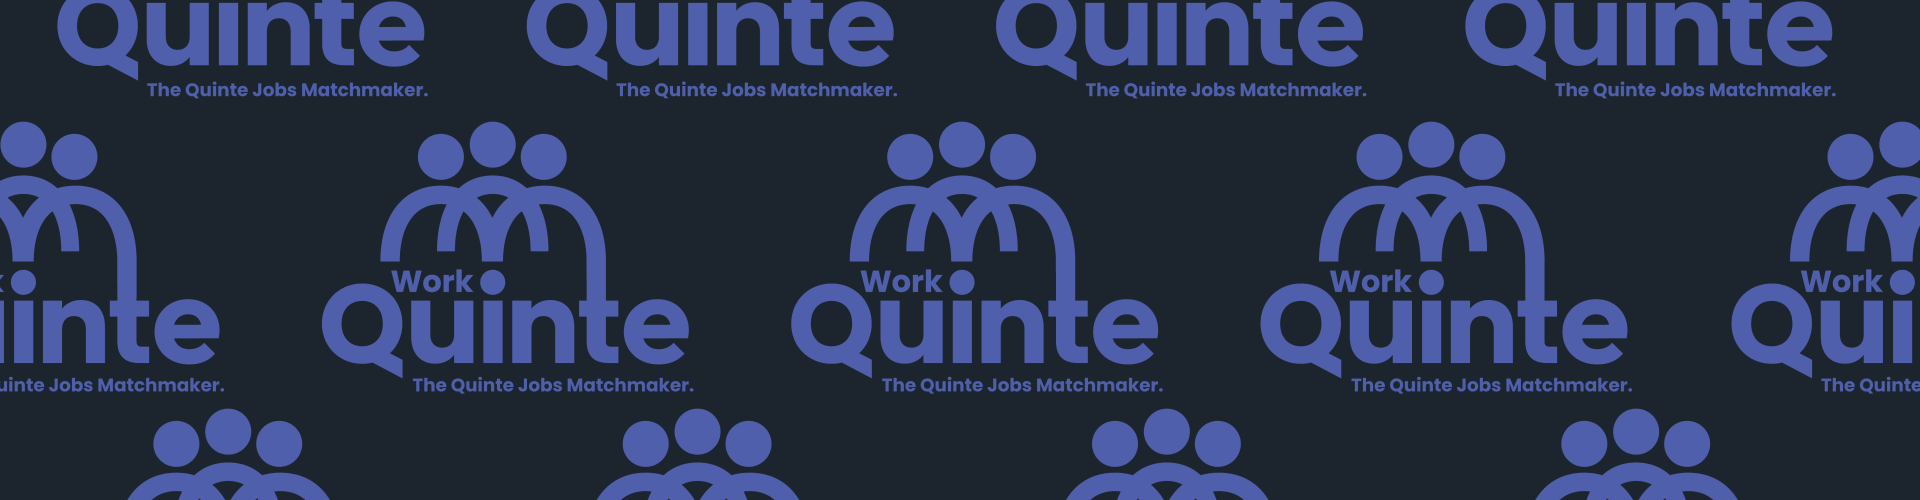 Blue background with black Work in Quinte logo and The Quinte Jobs Matchmaker tagline.